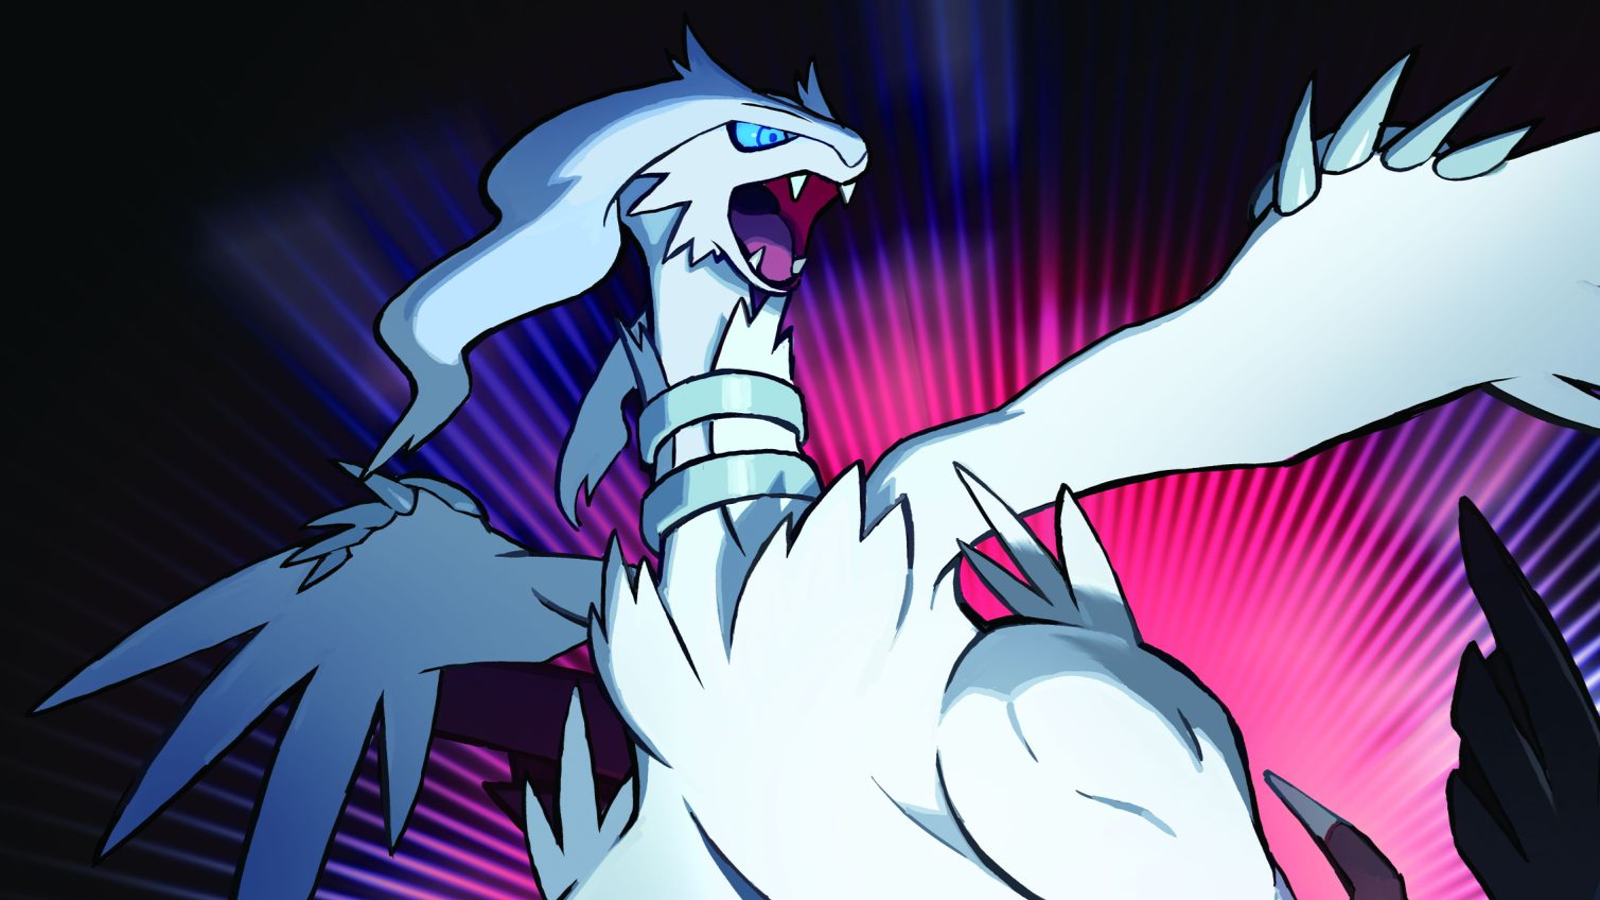 ✨AerlyseArt✨ on X: Today I upload more pokemon from the legendary #Pokemon  collection I made 😄!! This time Reshiram, Zekrom and Kyurem!! You can find  these designs (among many others!) as rainbow